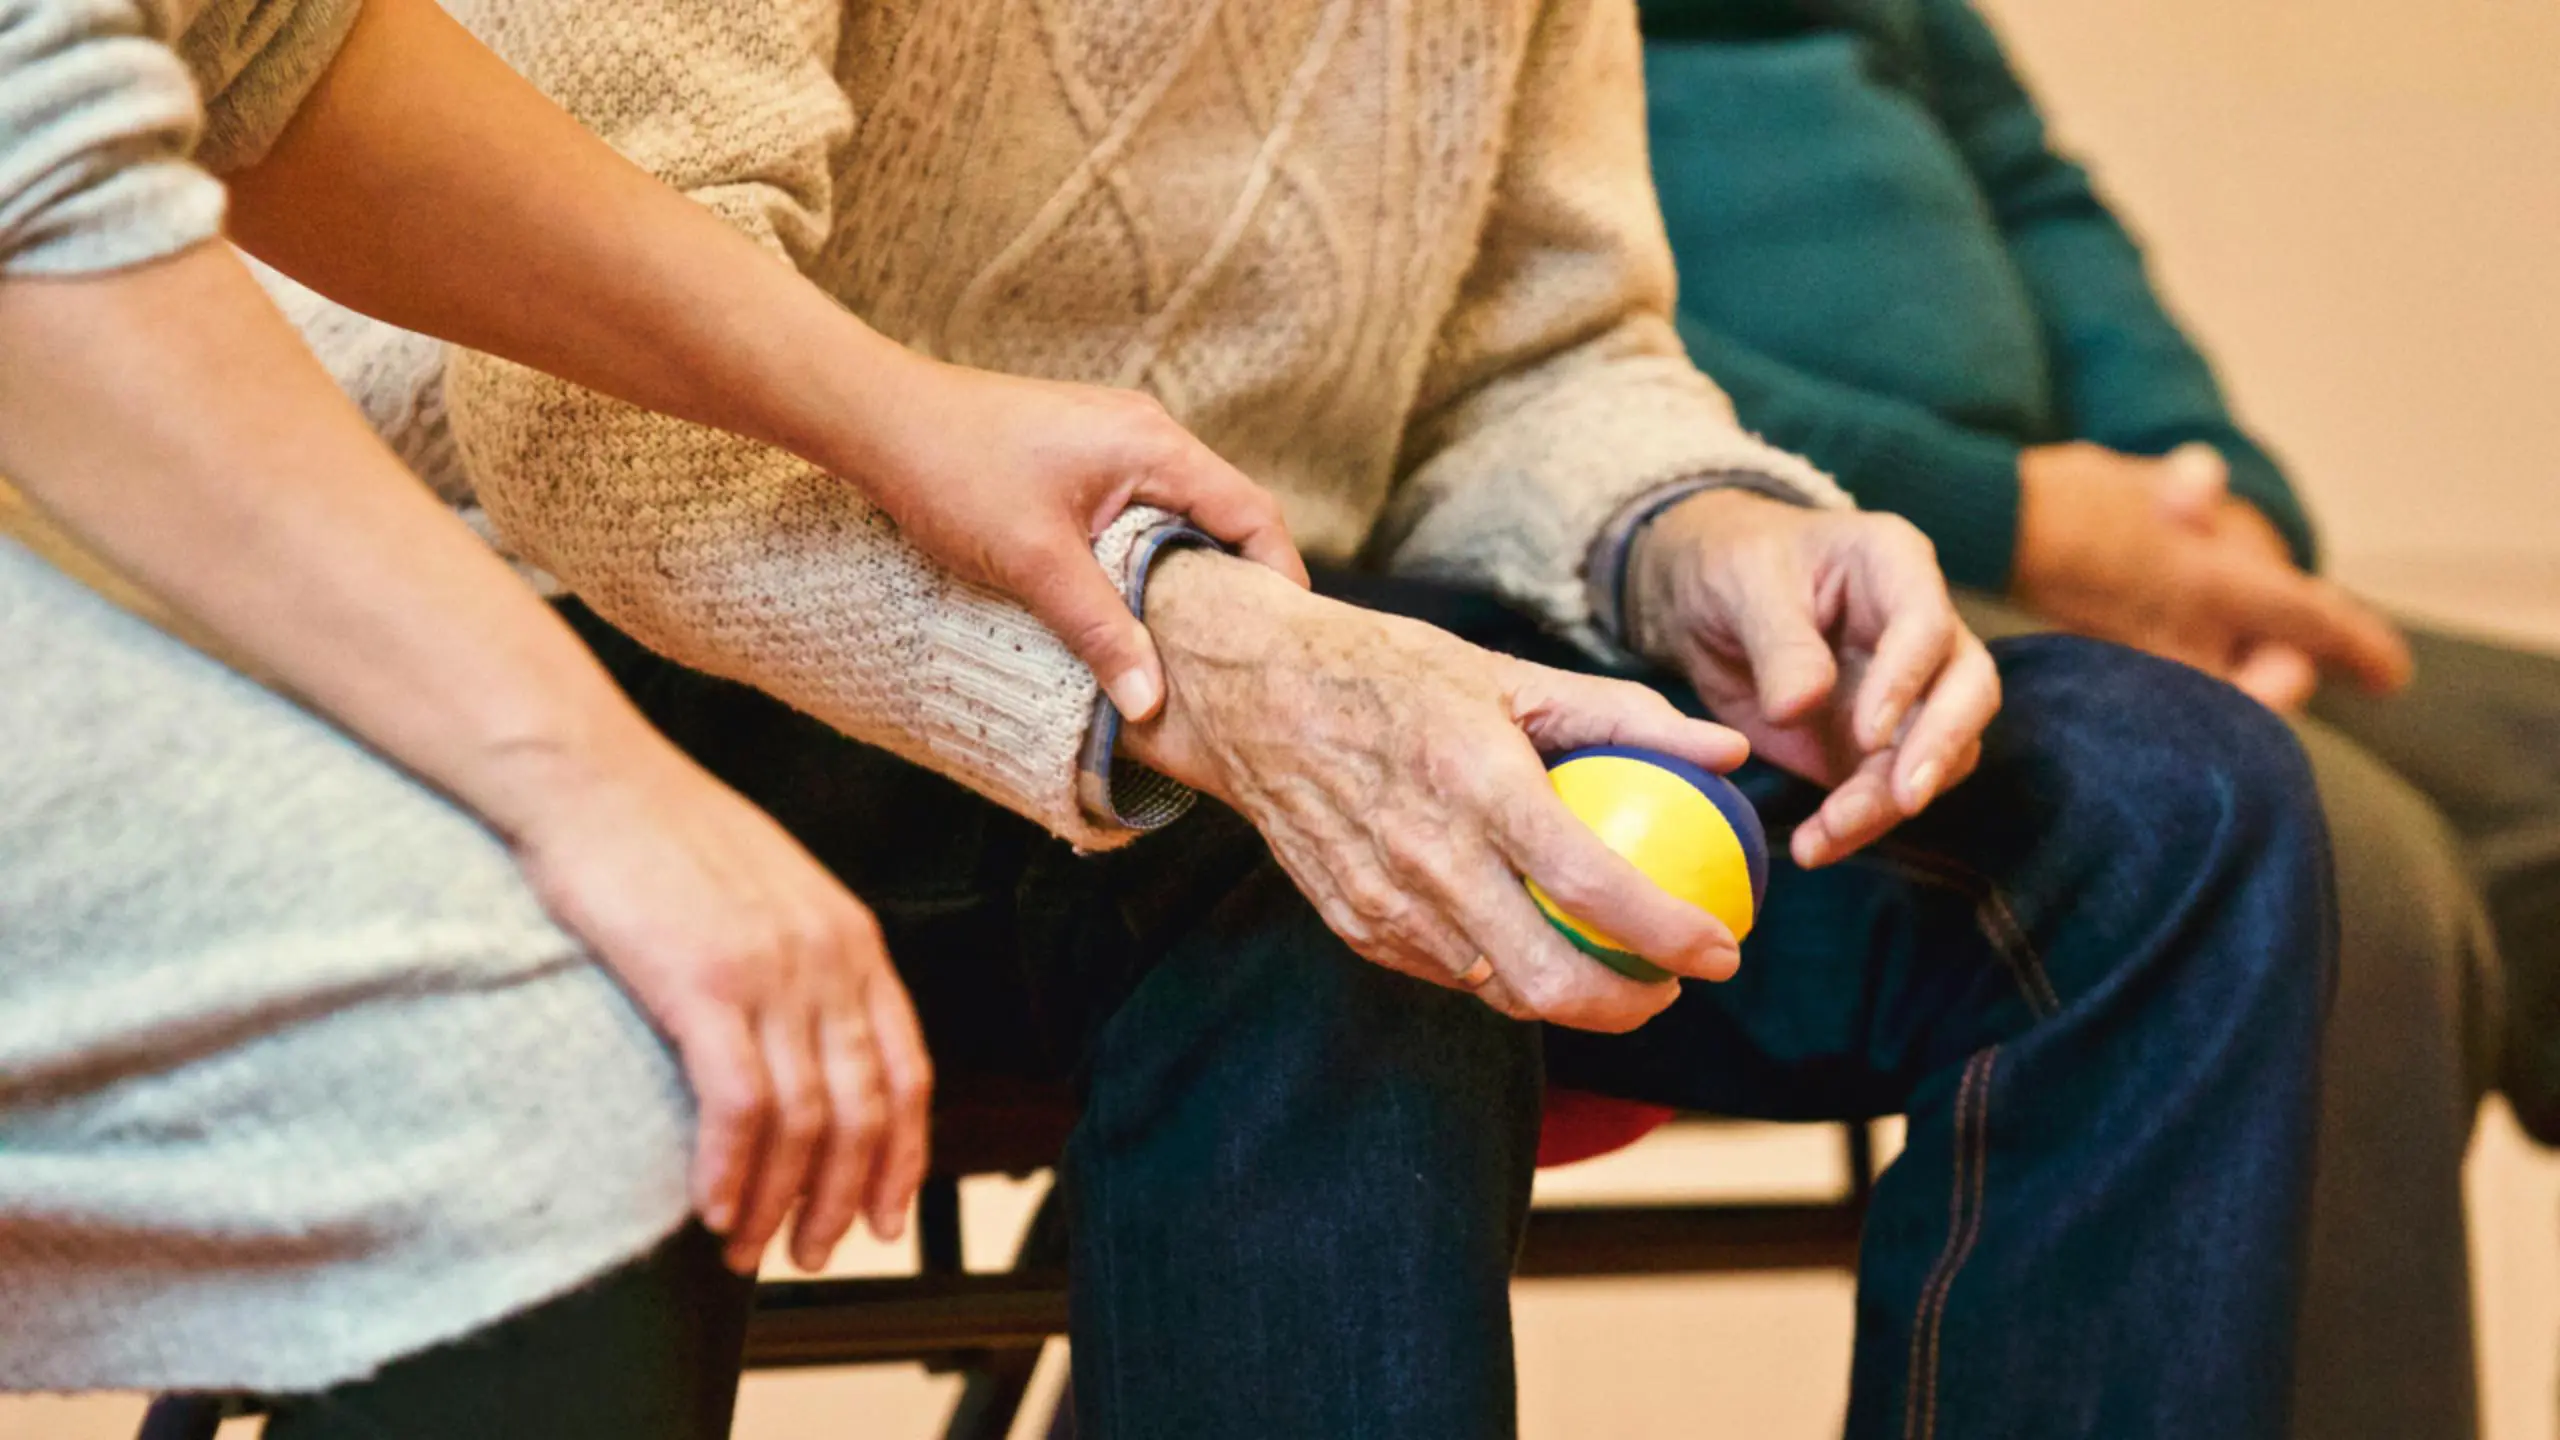 health care worker places their hand on the arm of an elderly person holding a stress ball